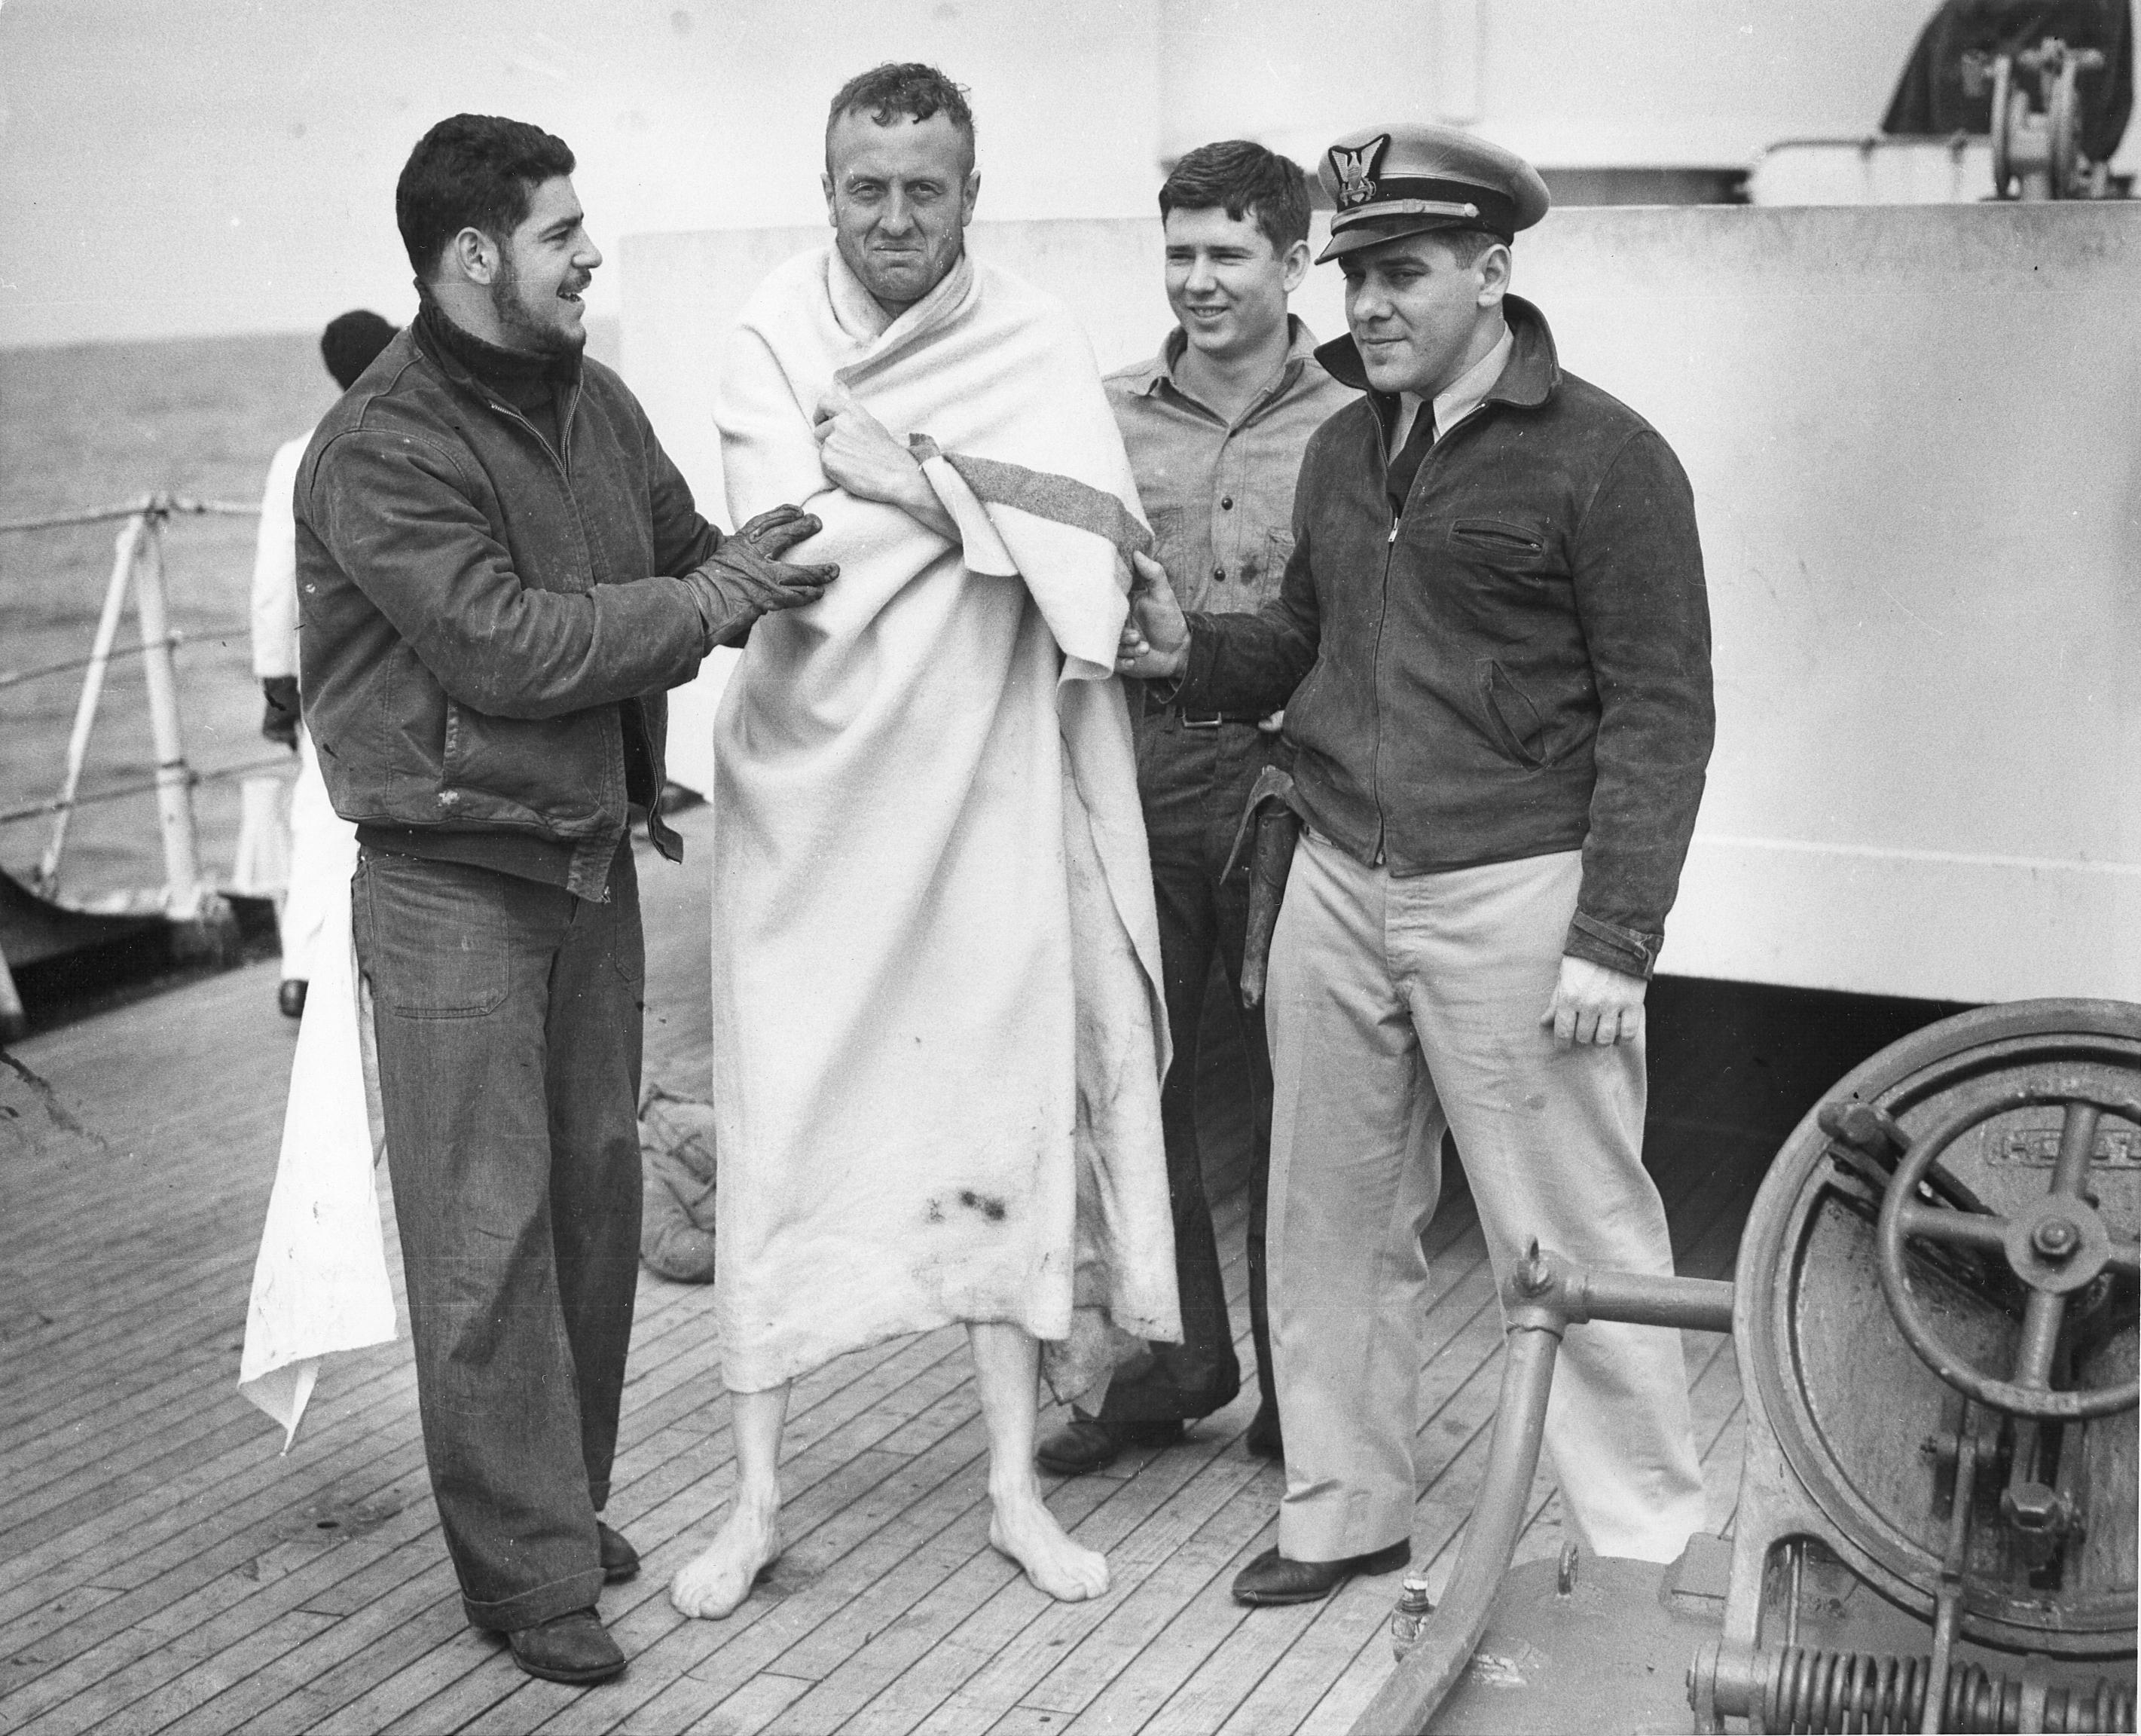 Crew of USS Spencer cared for rescued U-175 sailors, North Atlantic, 500 nautical miles WSW of Ireland, 17 Apr 1943, photo 1 of 2